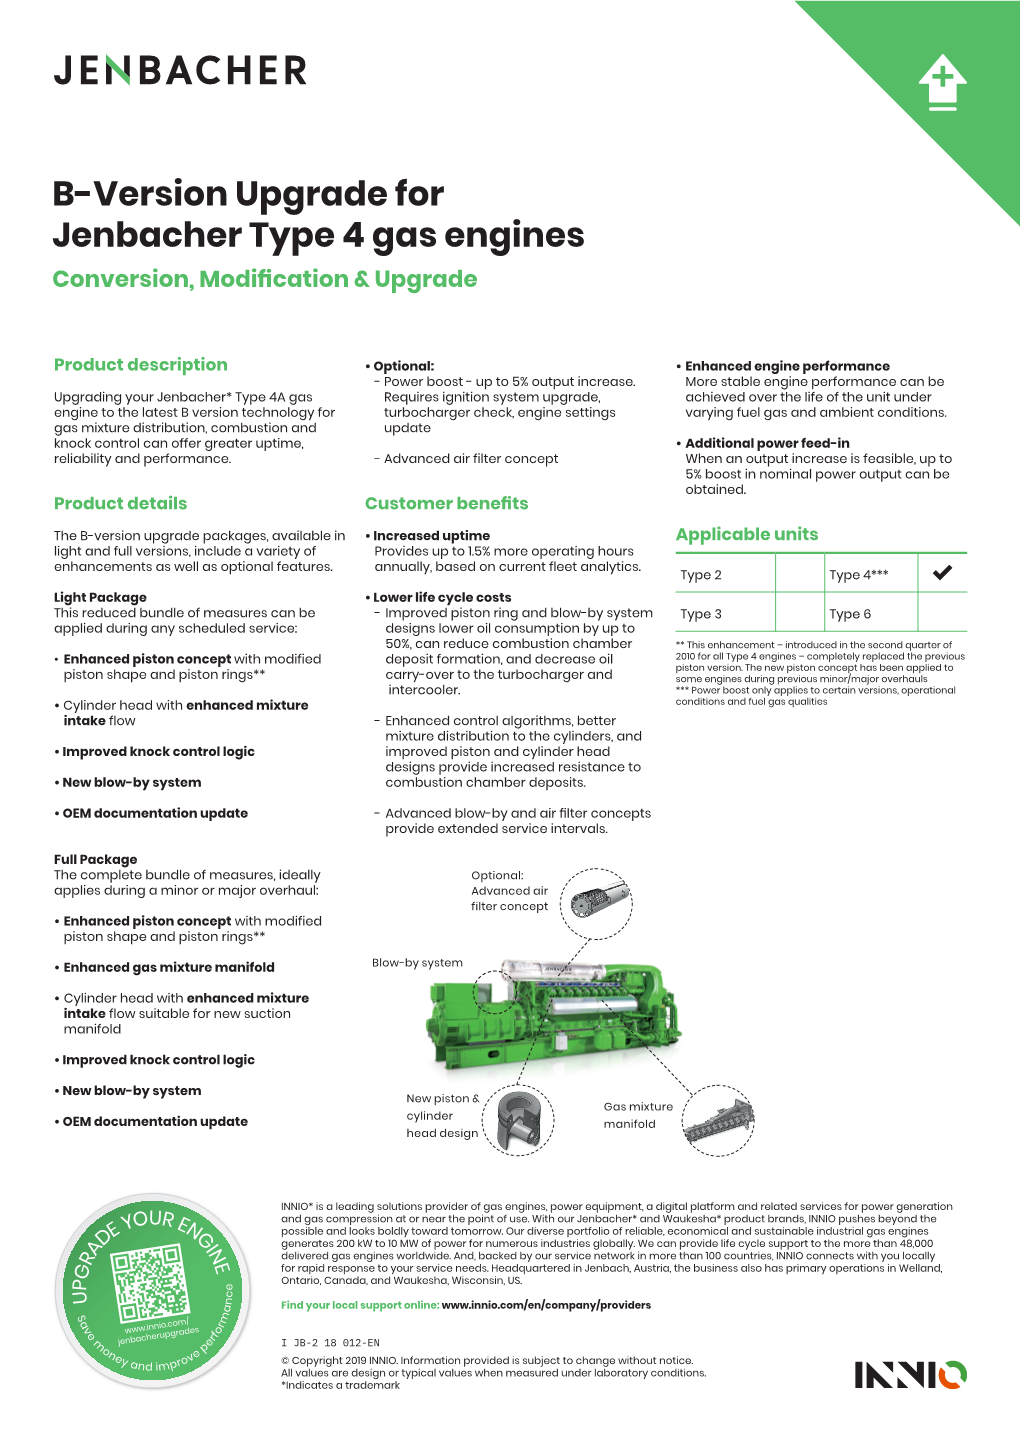 B-Version Upgrade for Jenbacher Type 4 Gas Engines Conversion, Modification & Upgrade